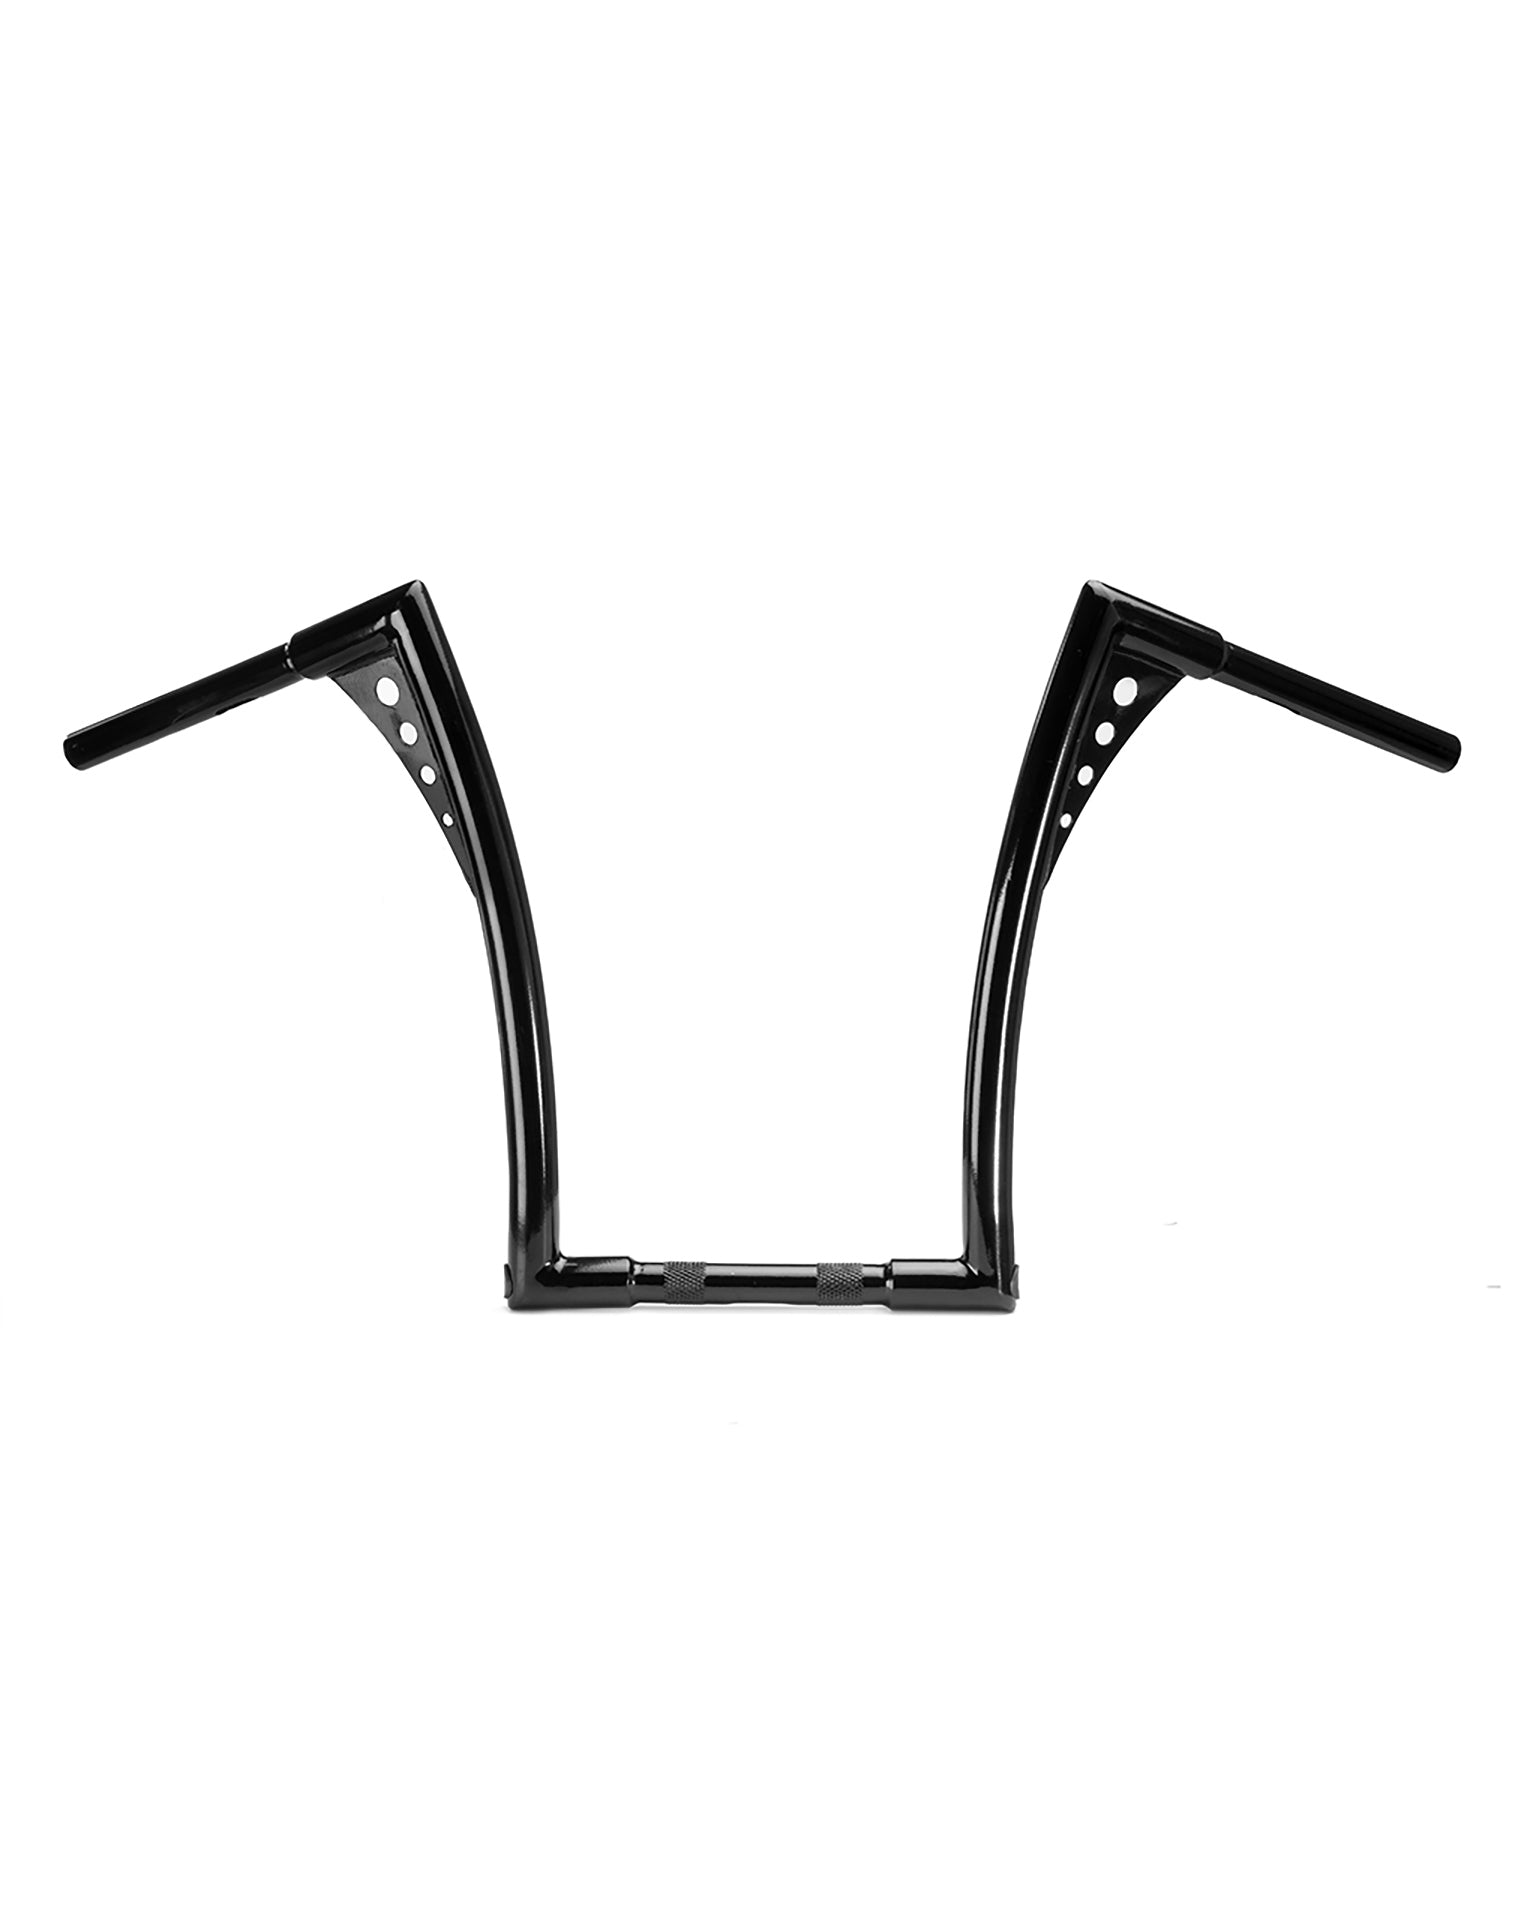 Viking Iron Born 12" Handlebar For Harley Dyna Super Glide FXD Gloss Black Front View